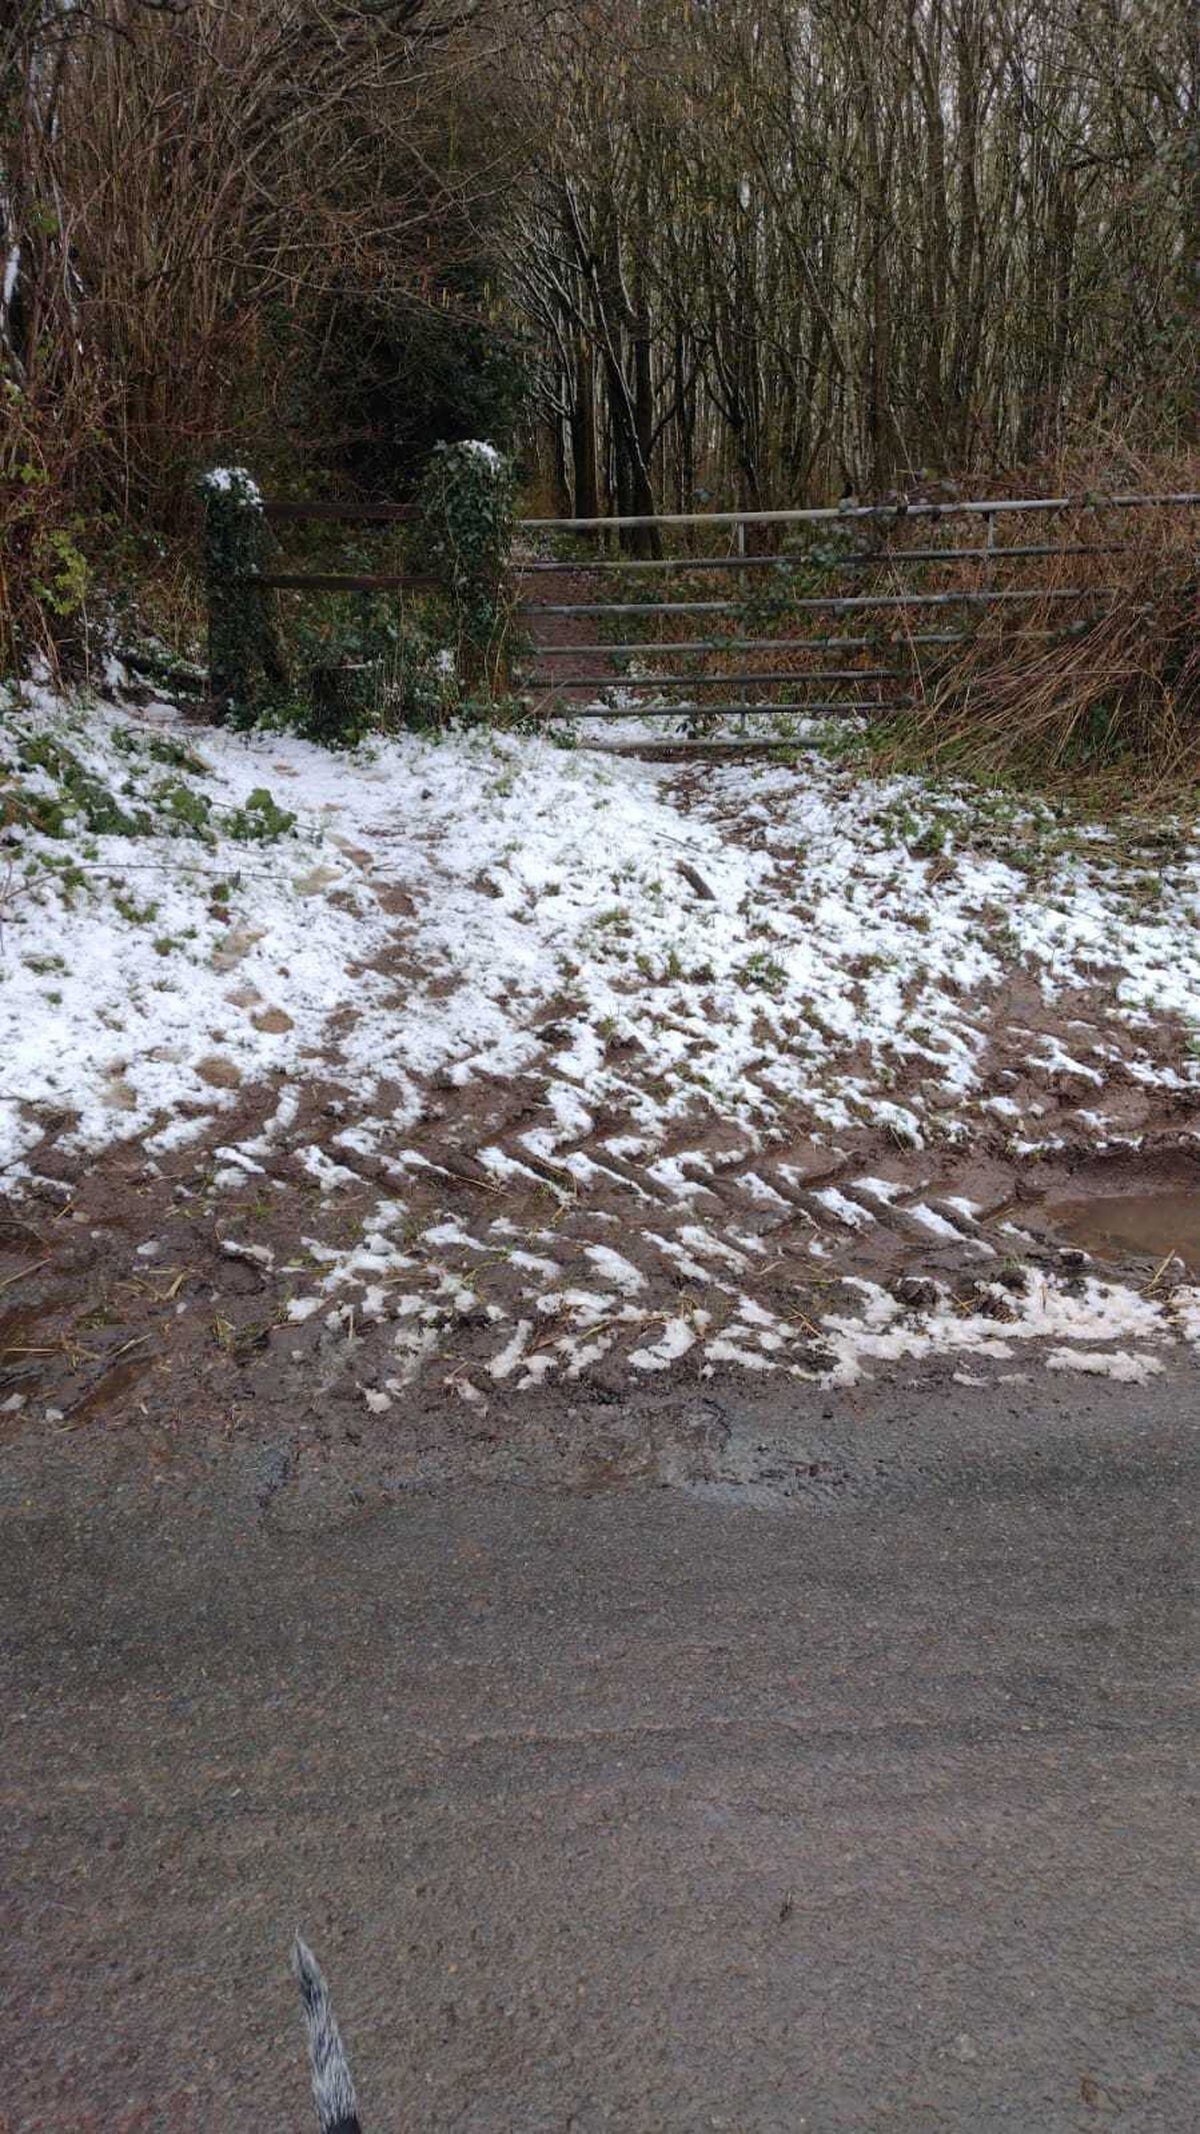 The path leading up to where the dog was found. Photo: RSPCA